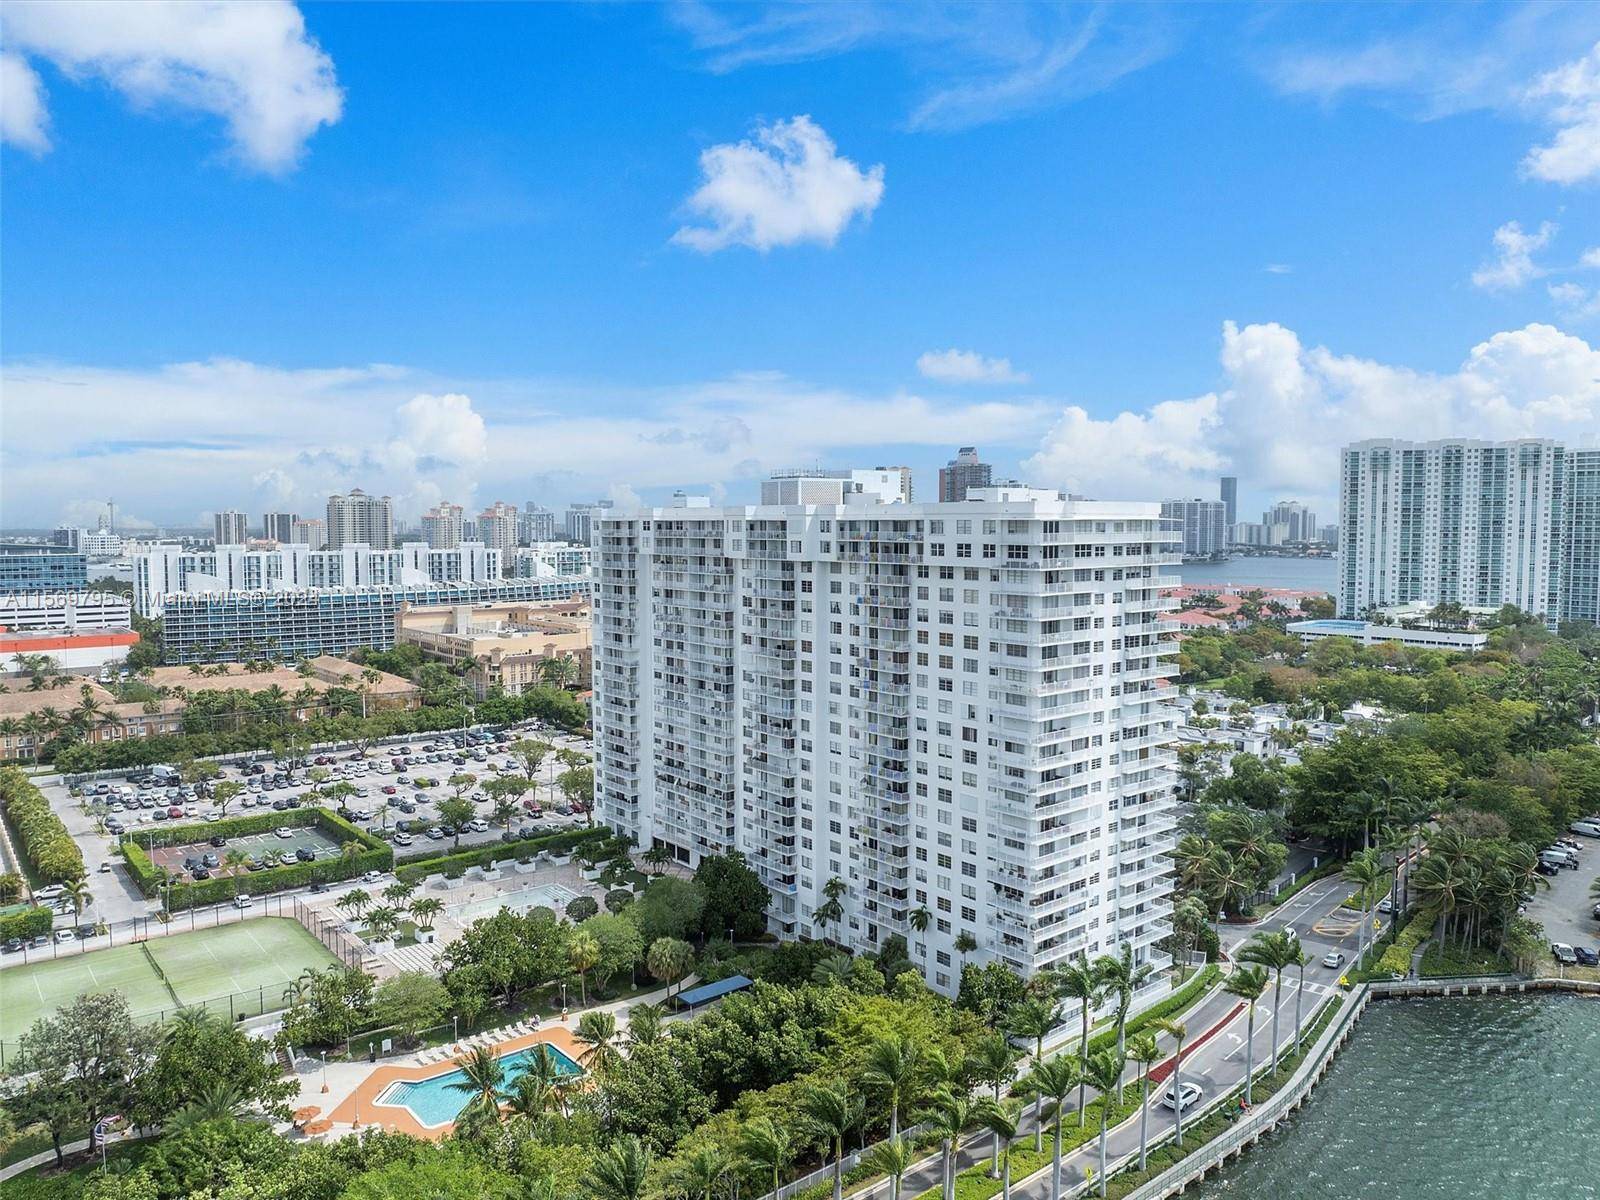 Stunning and contemporary condominium situated in an ideal location near Williams Island.